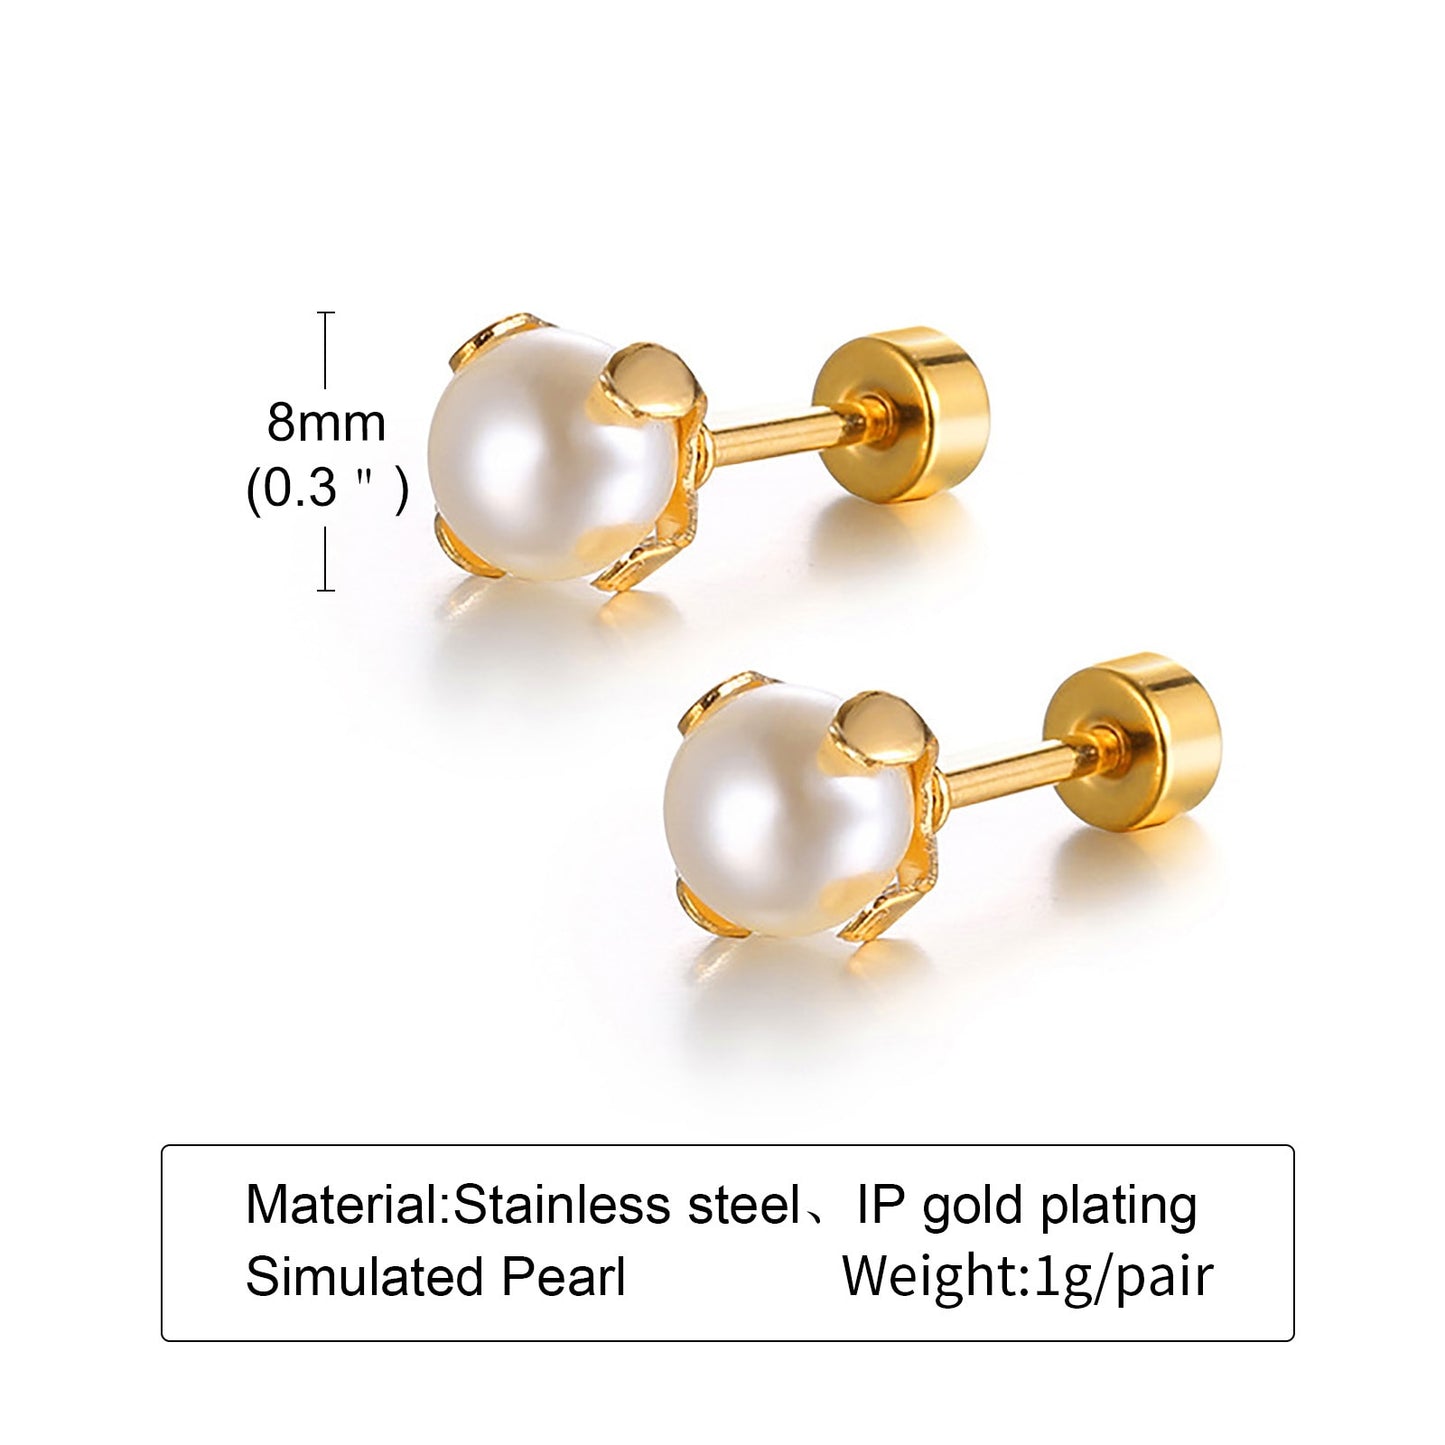 Aretes para mujeres Simple Basic Stud Earrings for Women Men, Stainless Steel with Simulated Pearl Earrings, Casual Girl Boy Street Ear Jewelry